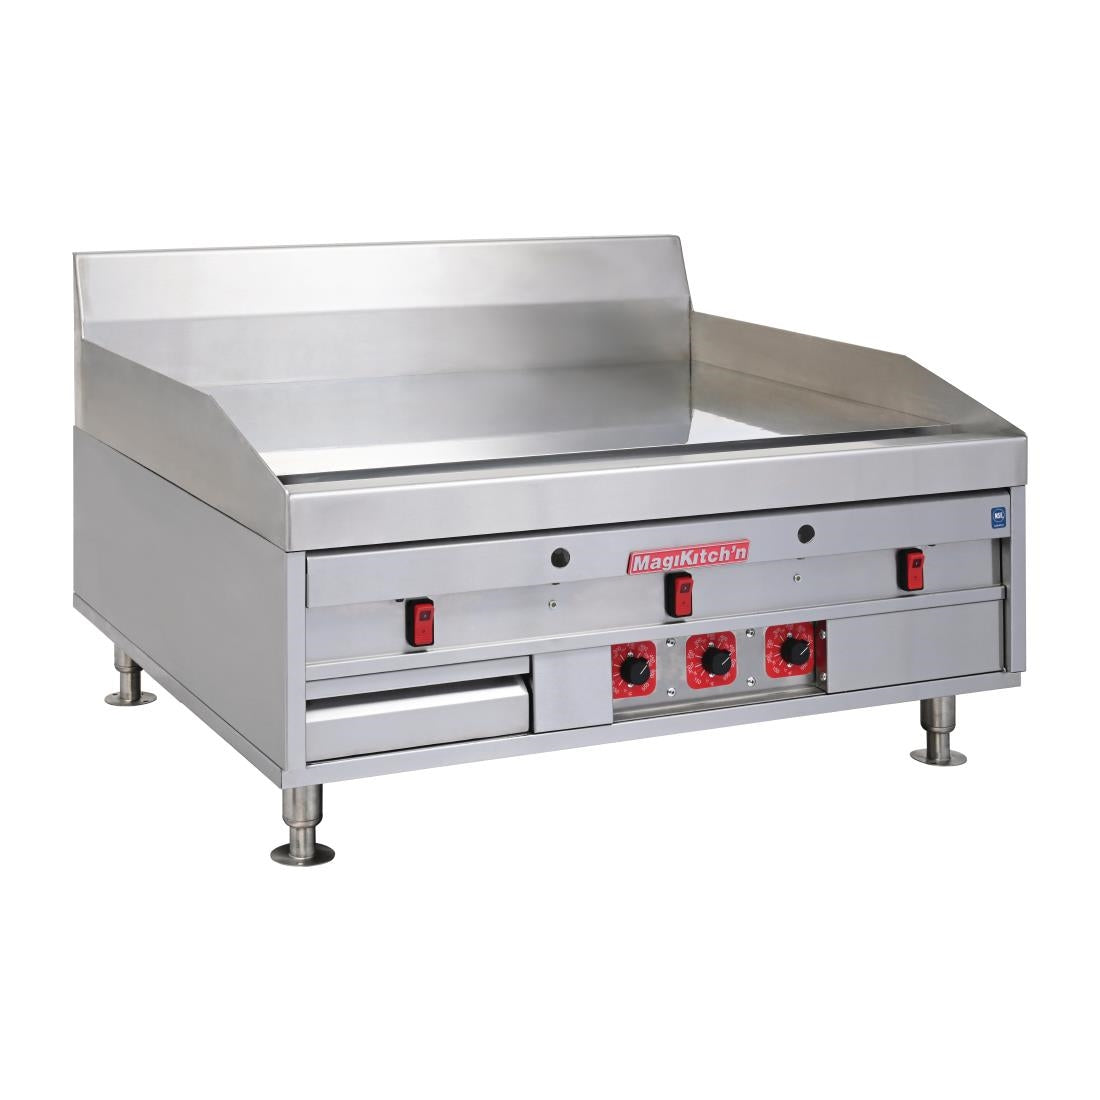 FP884 MagiKitch'n Heavy Duty Chrome Griddle MKE24 JD Catering Equipment Solutions Ltd